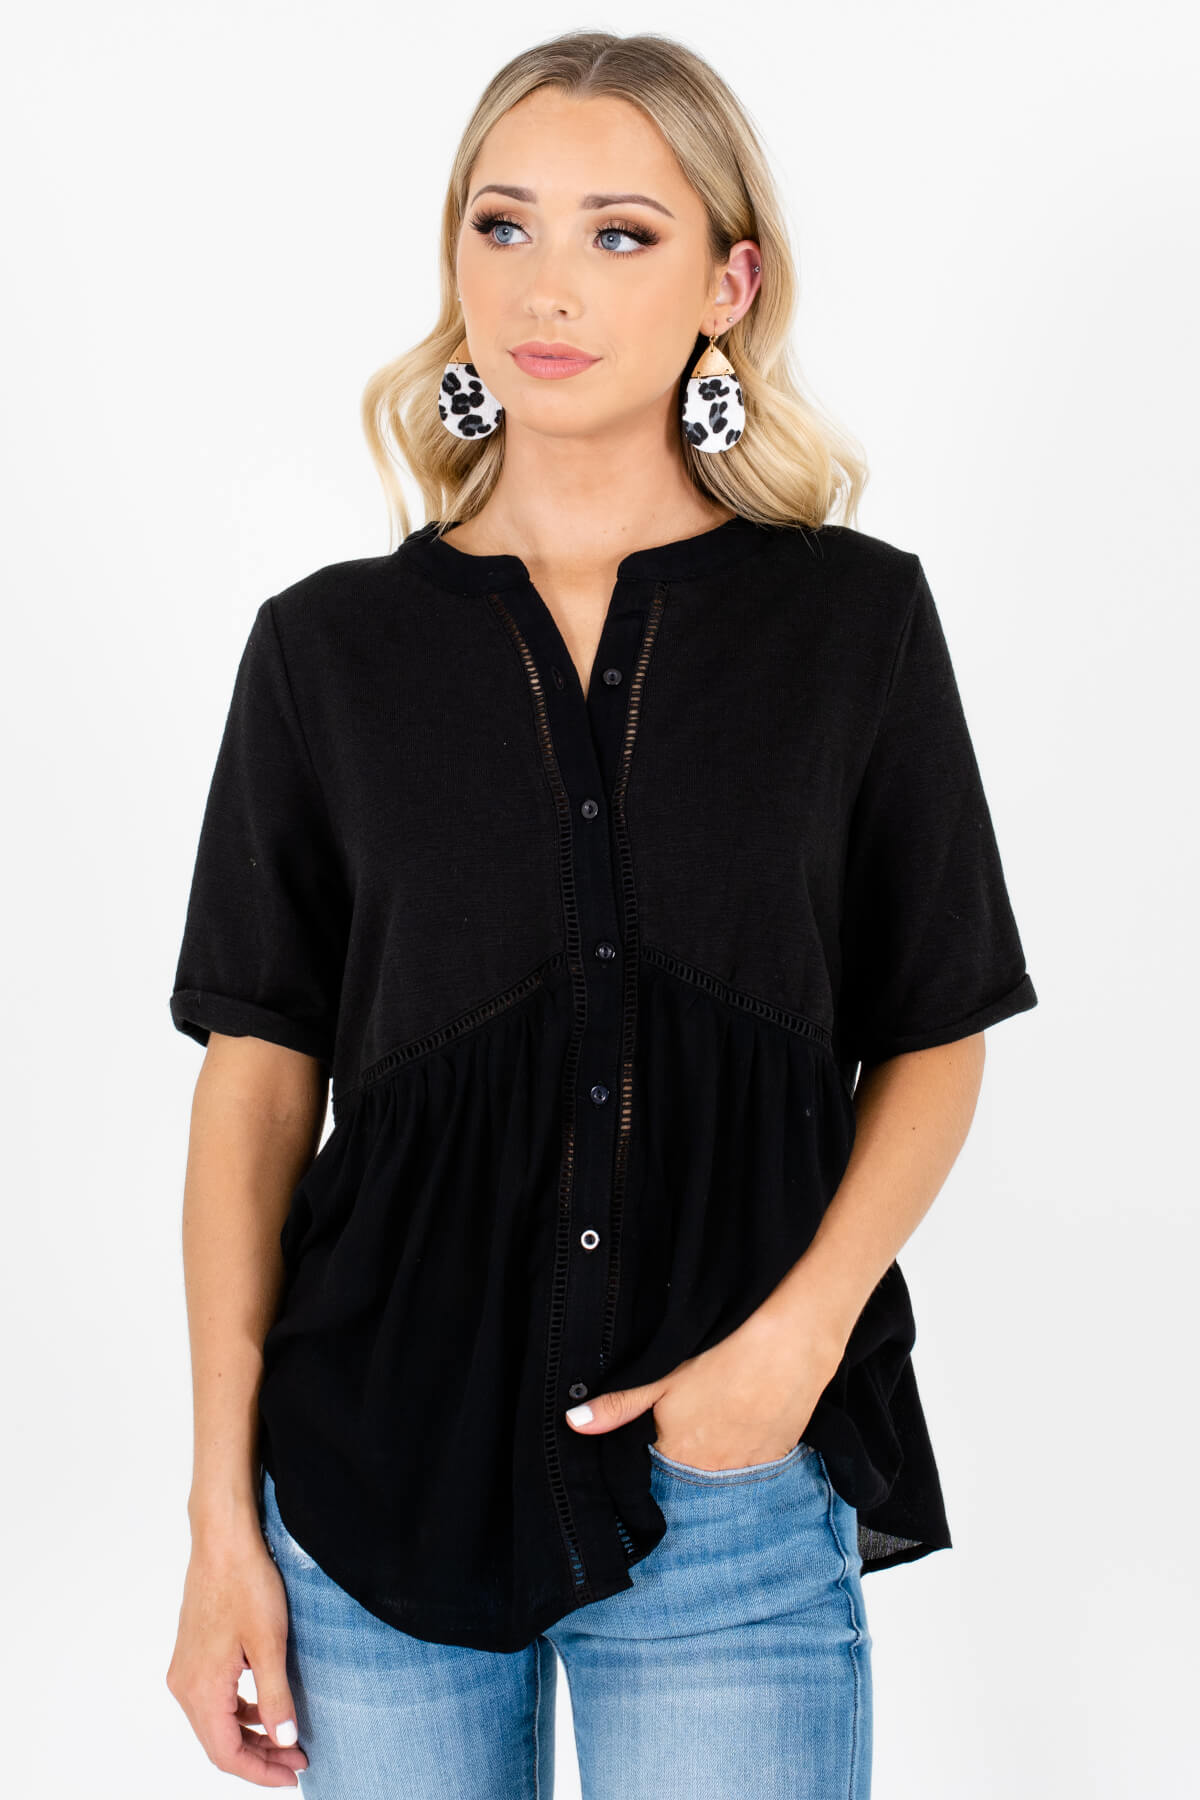 Black Button-Up Shirts Affordable Online Boutique for Women